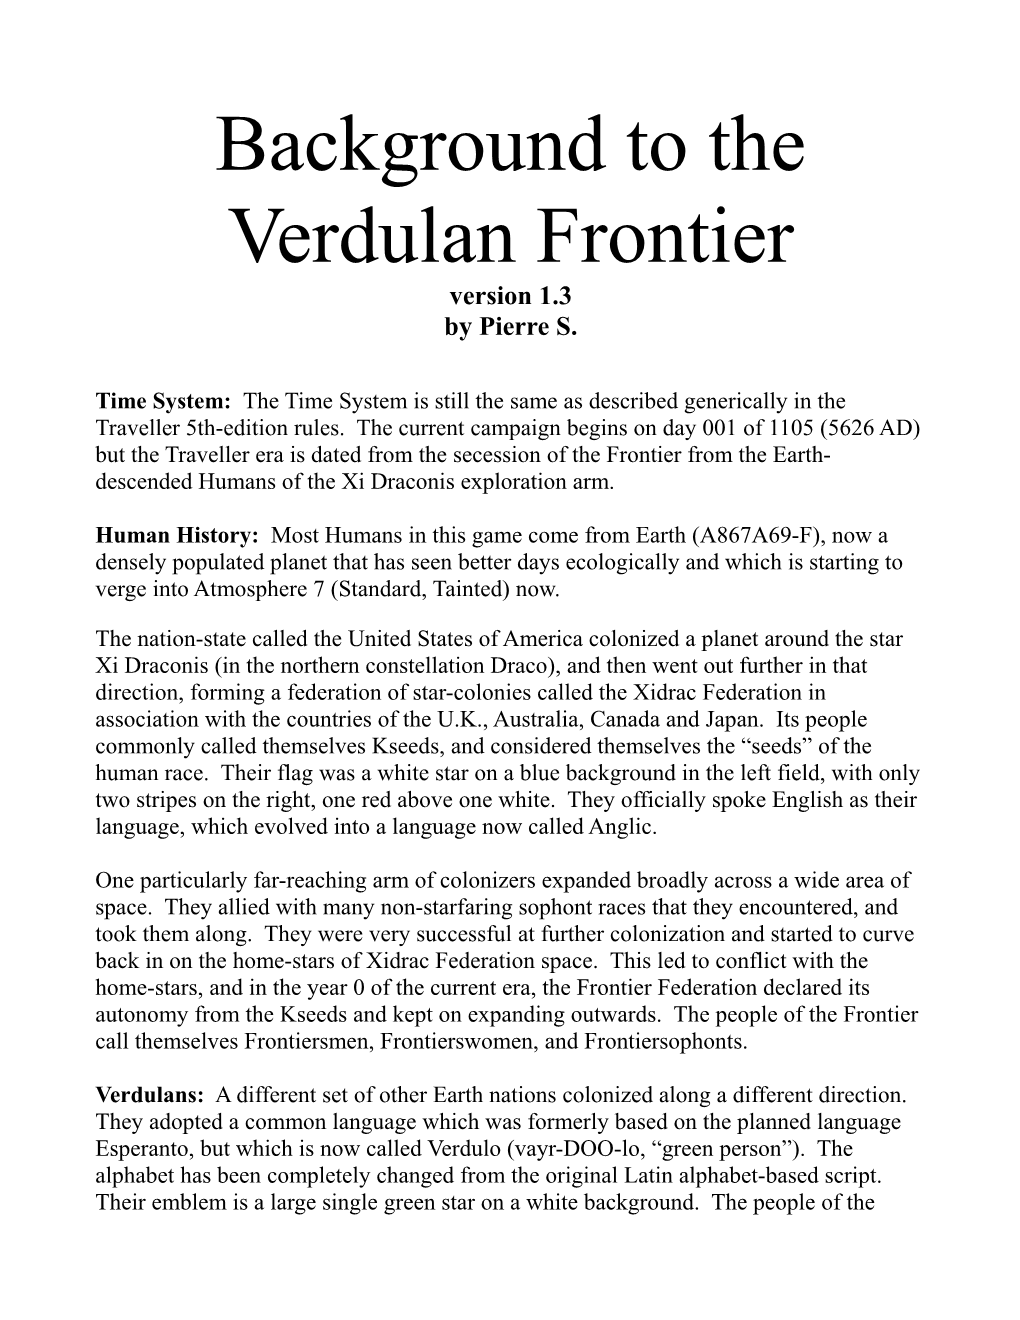 Background to the Verdulan Frontier